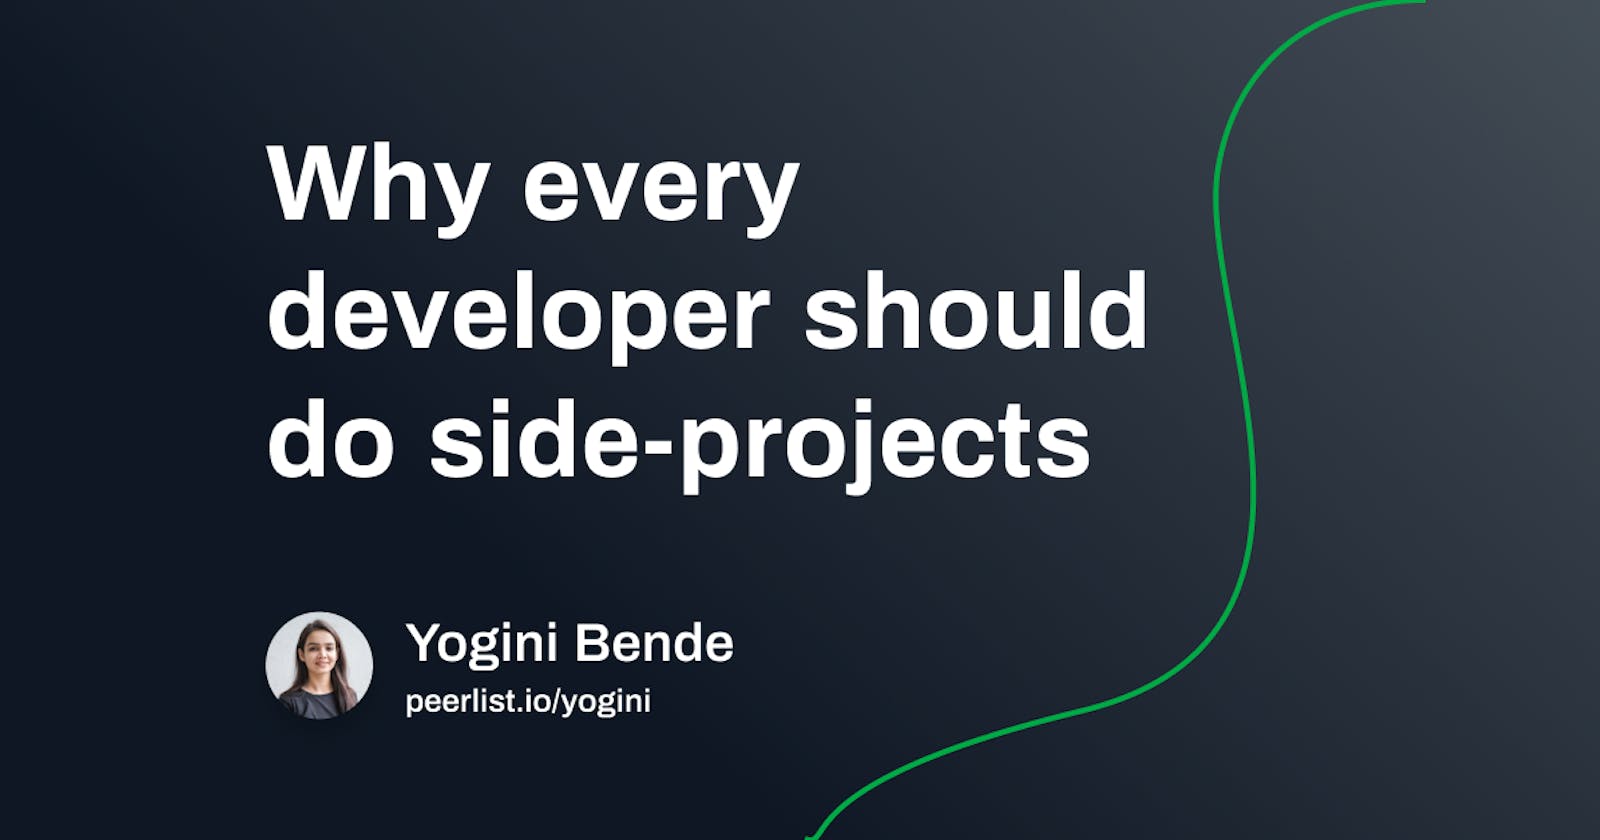 Why every developer should do side projects?